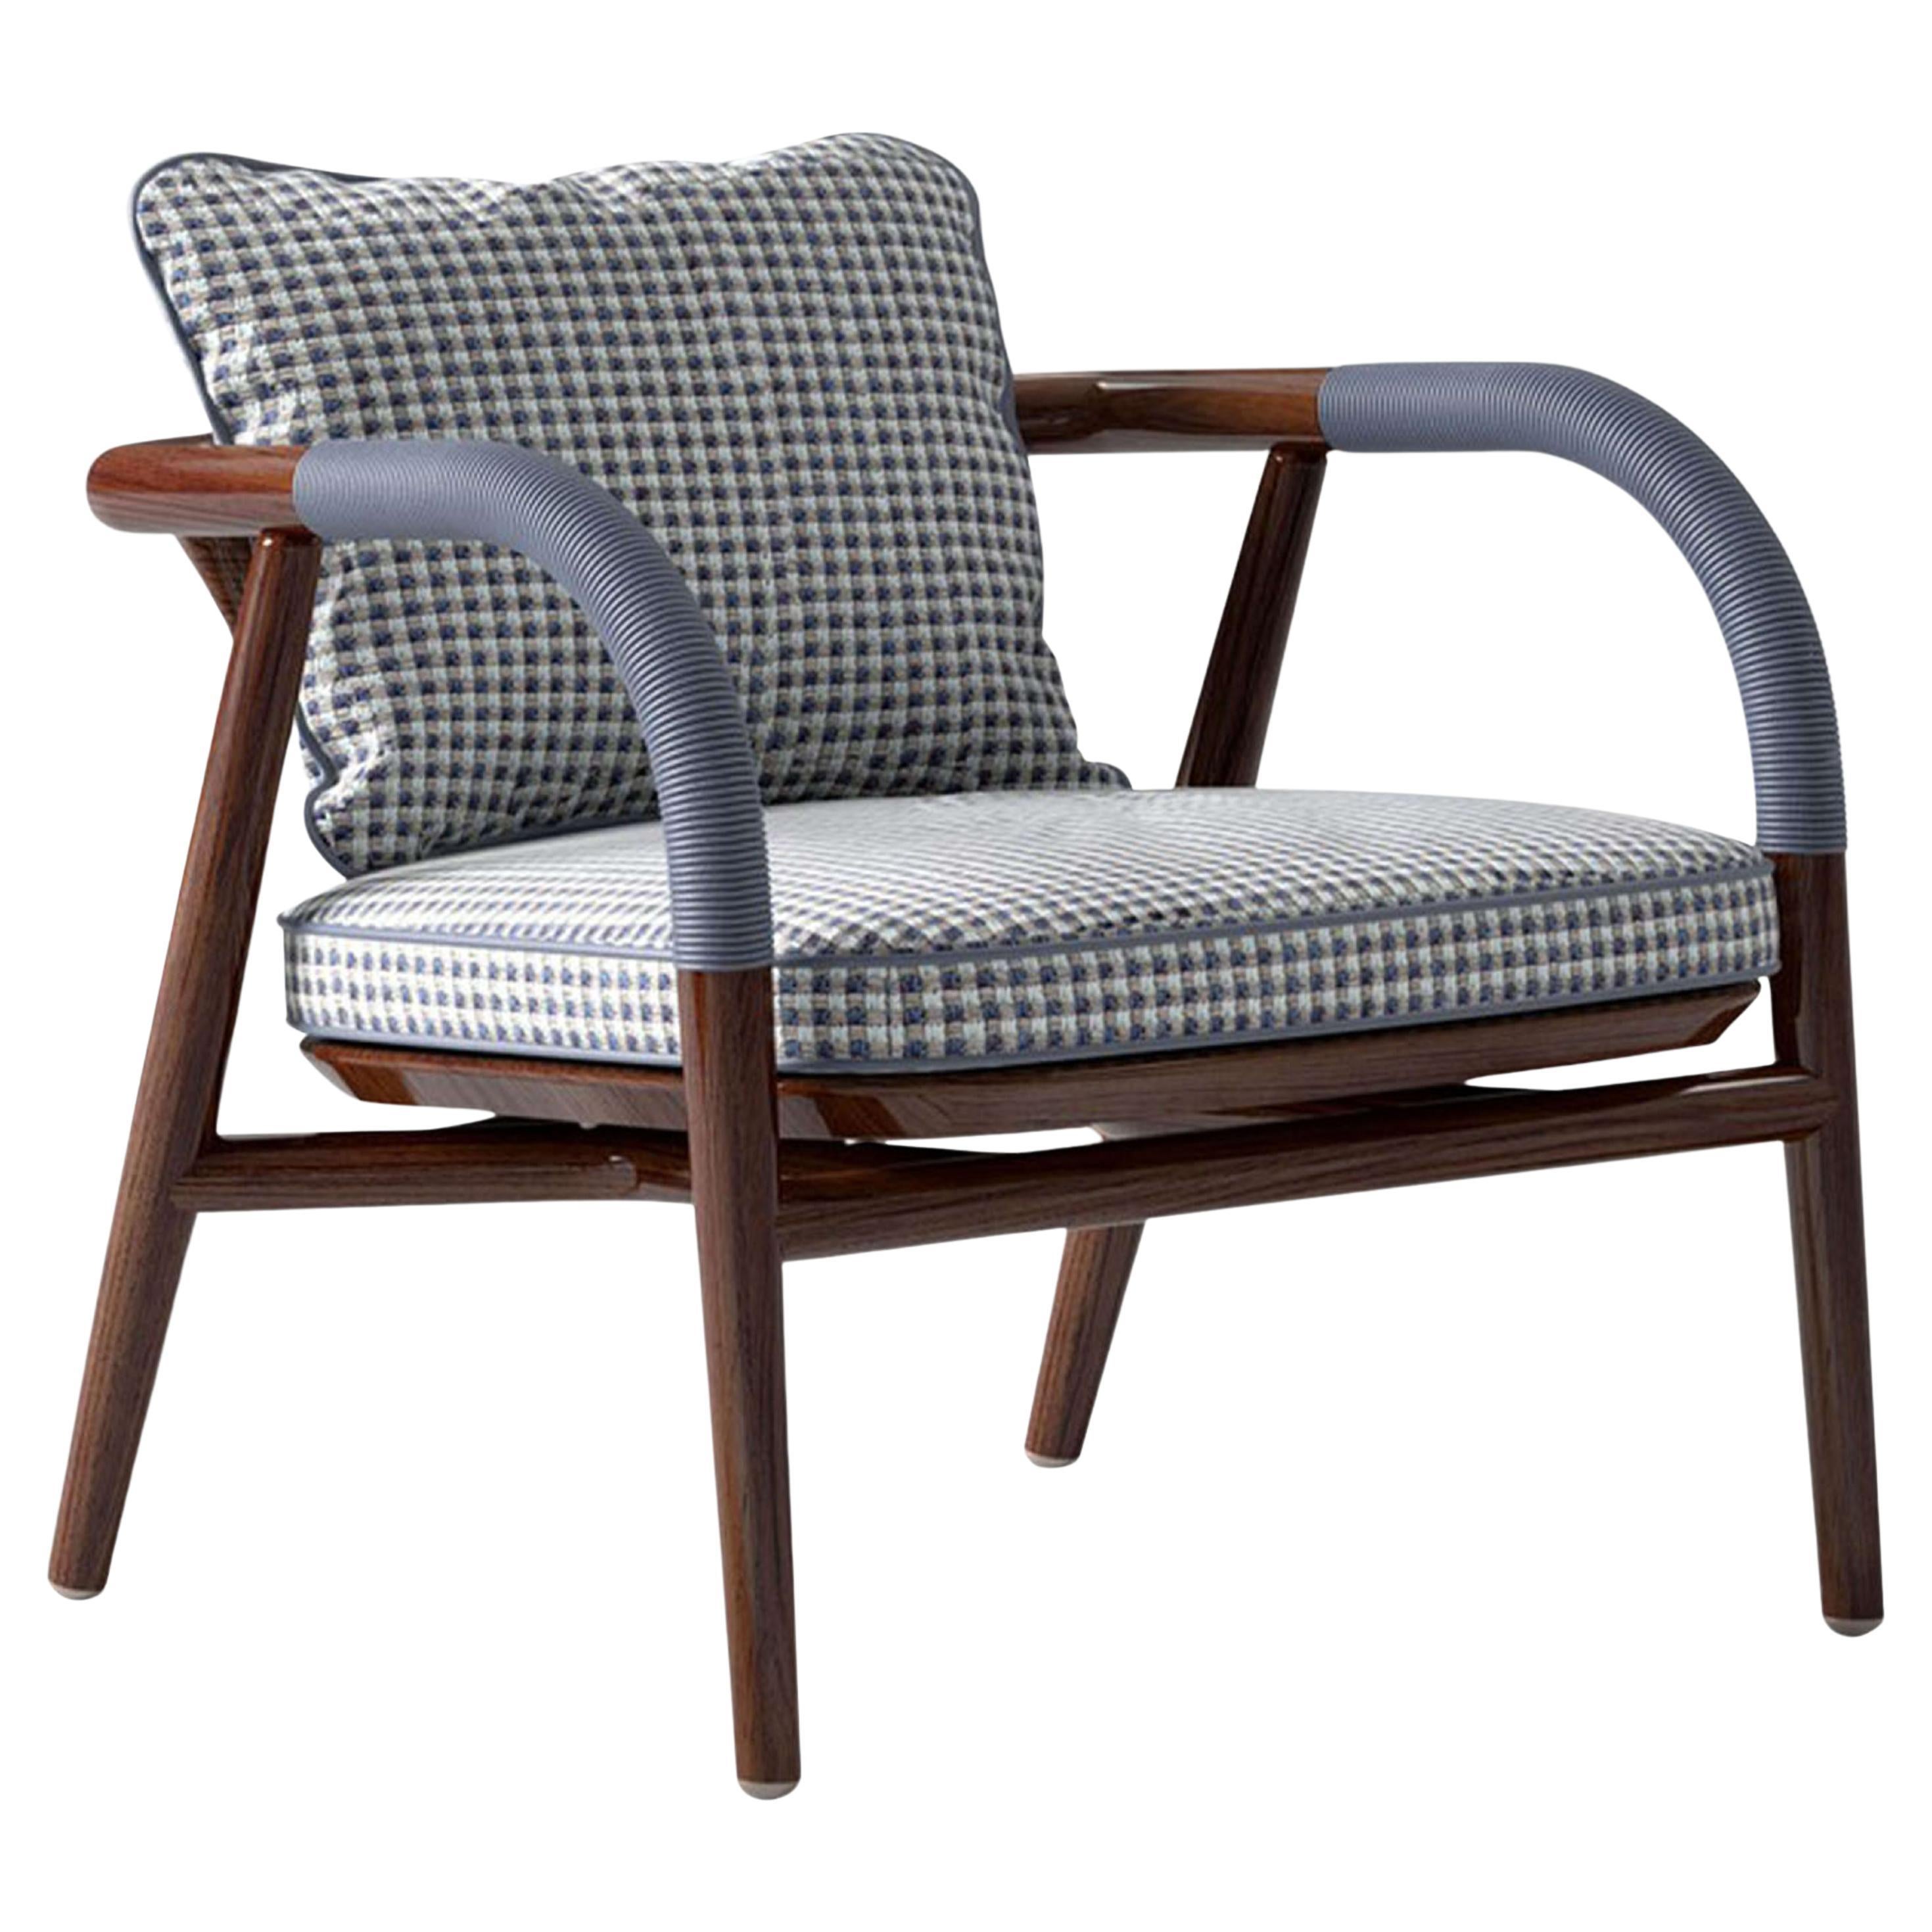  Wood Lounge Chair With Metal Details For Sale